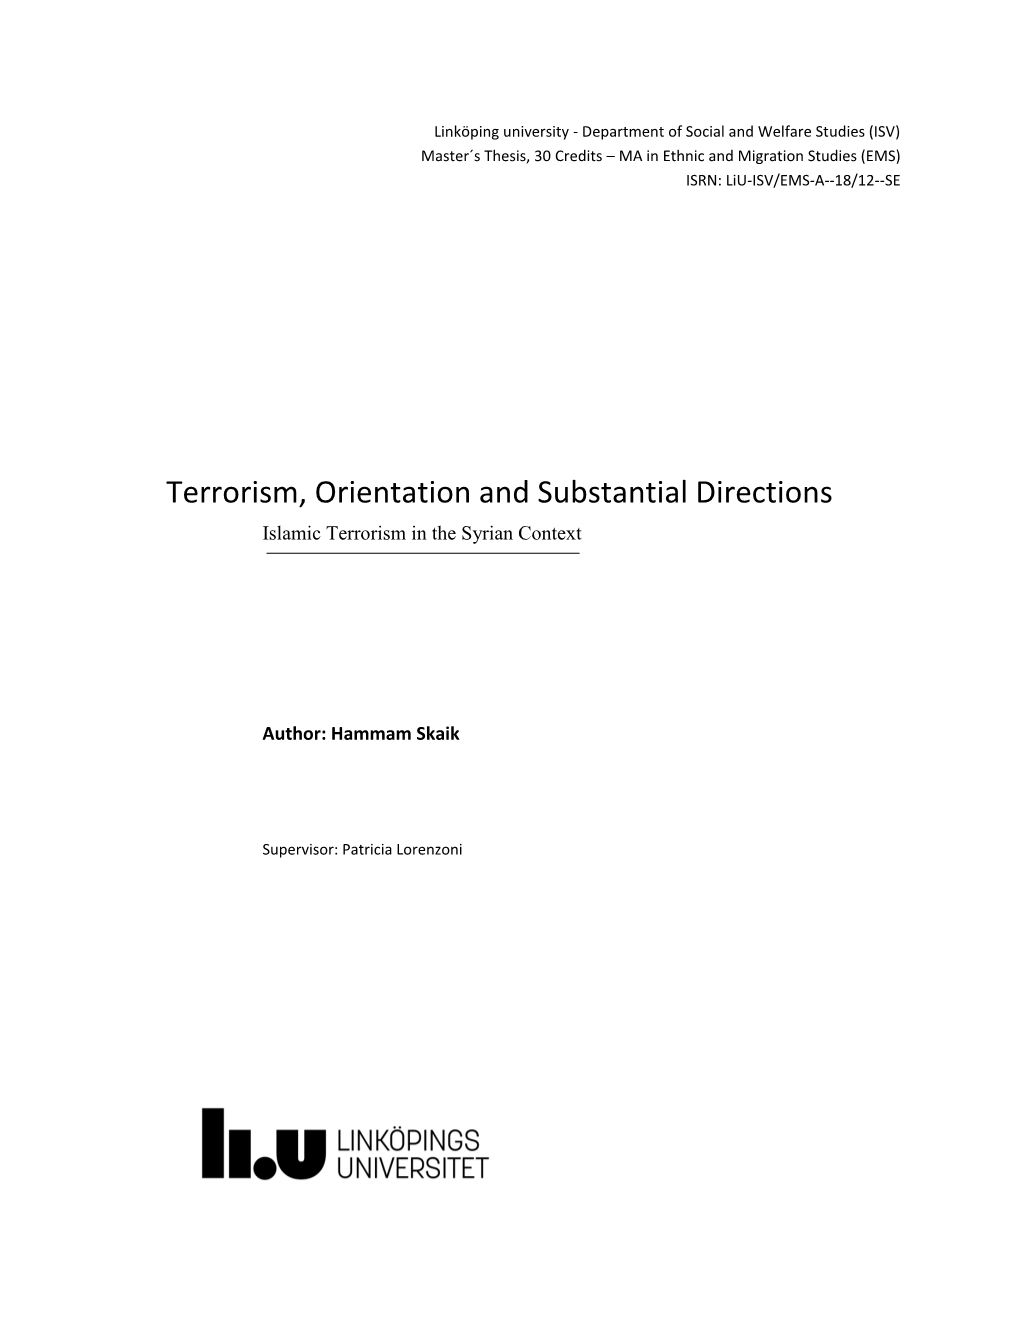 Terrorism, Orientation and Substantial Directions Islamic Terrorism in the Syrian Context